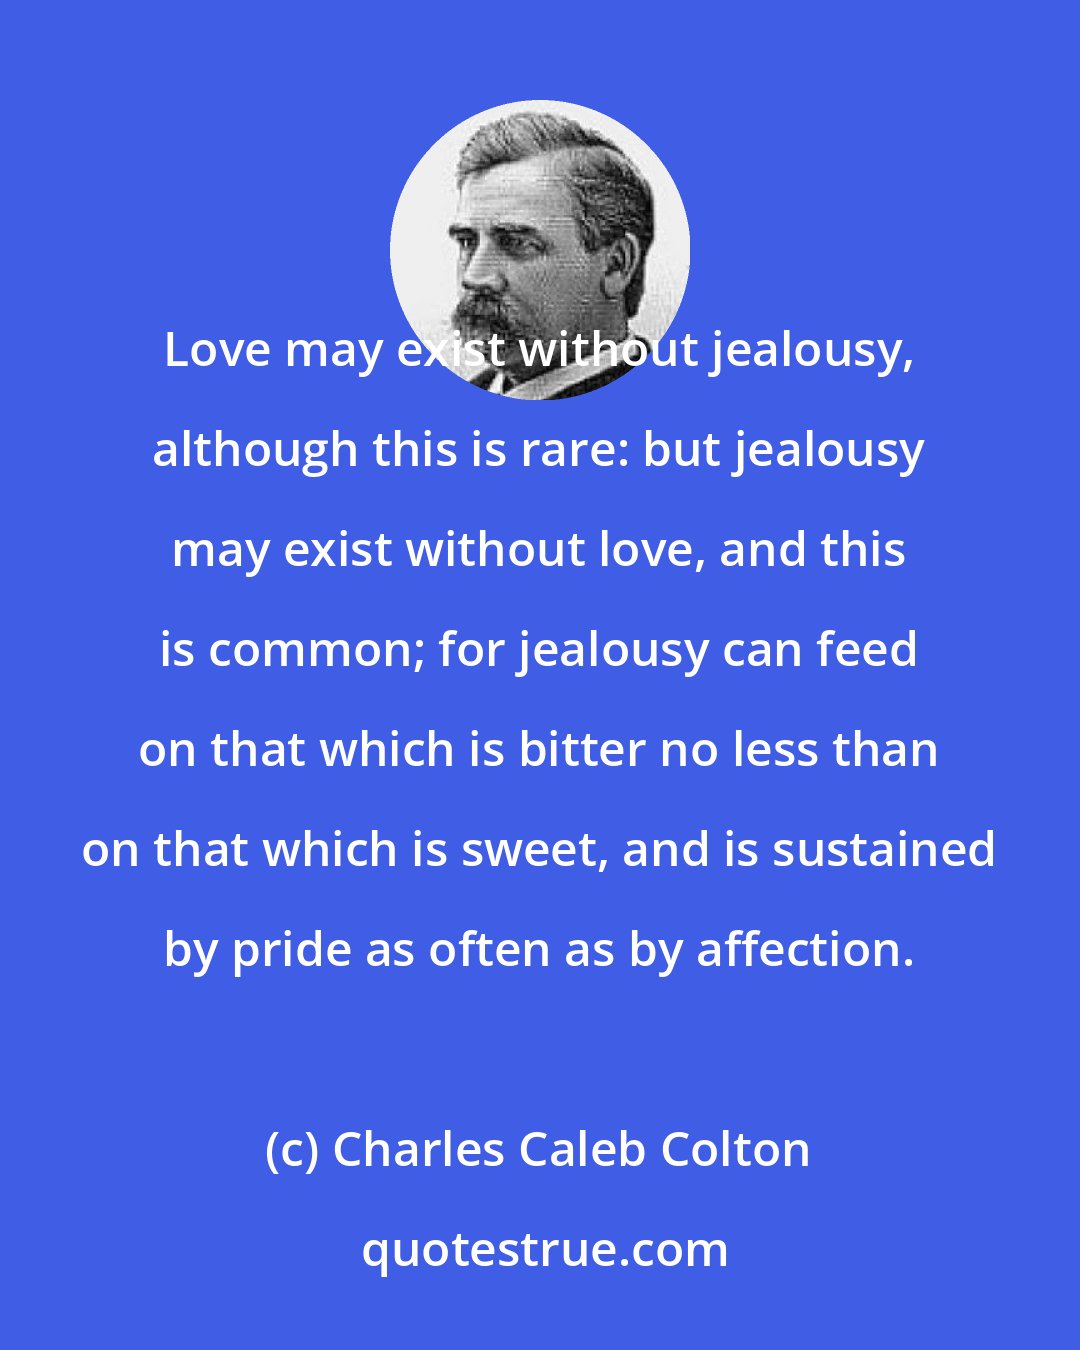 Charles Caleb Colton: Love may exist without jealousy, although this is rare: but jealousy may exist without love, and this is common; for jealousy can feed on that which is bitter no less than on that which is sweet, and is sustained by pride as often as by affection.